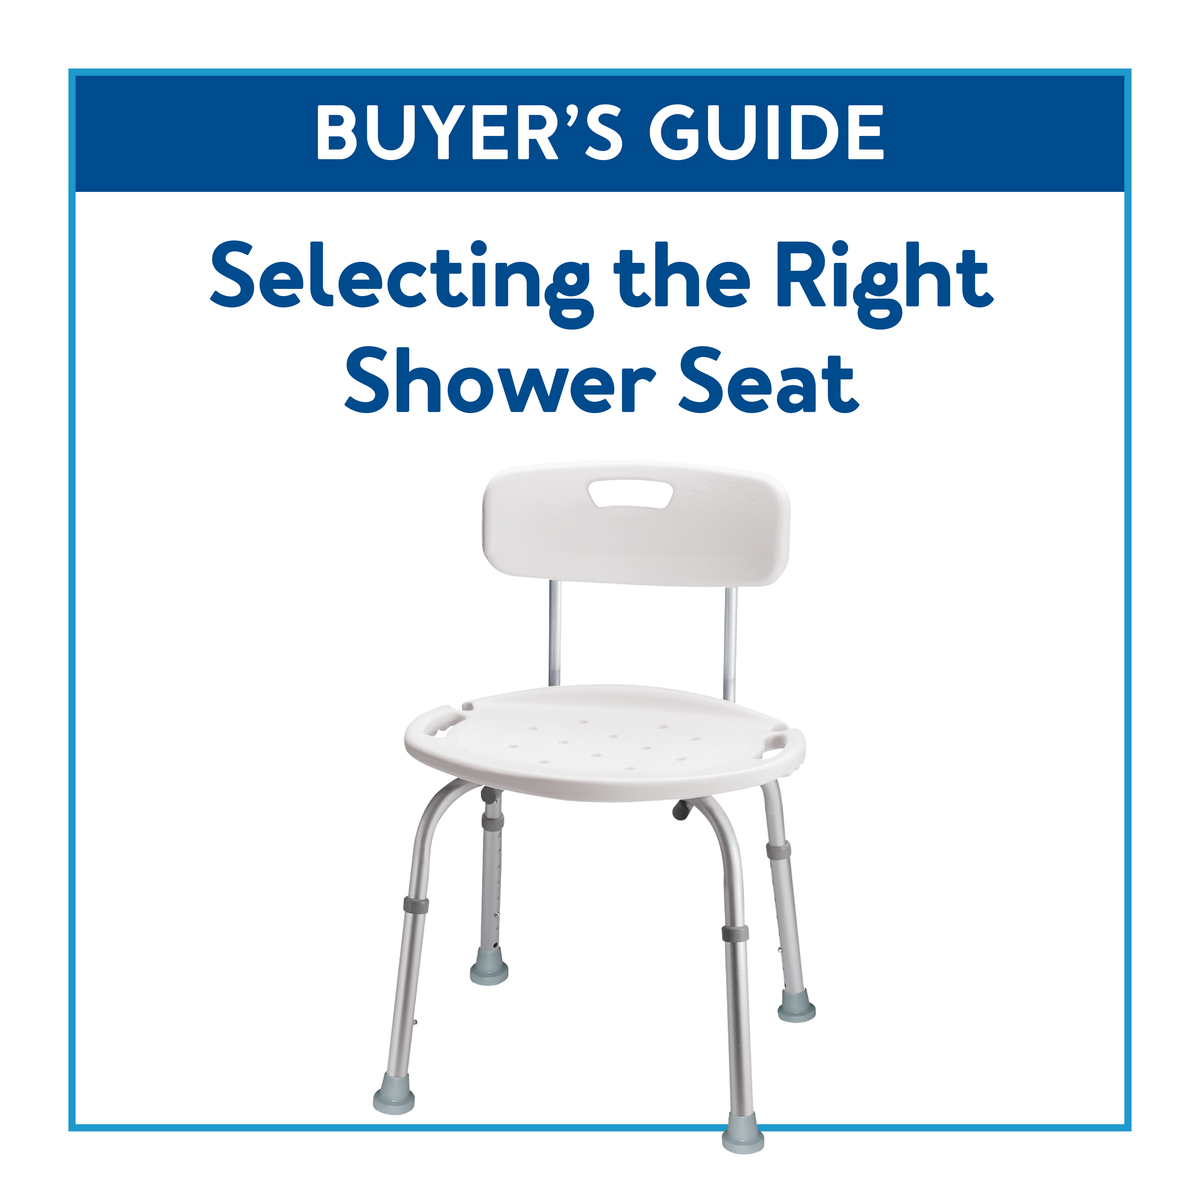 A buyer’s guide cover image with a shower seat. Text, “Buyer’s Guide: Selecting the Best Shower Seat”